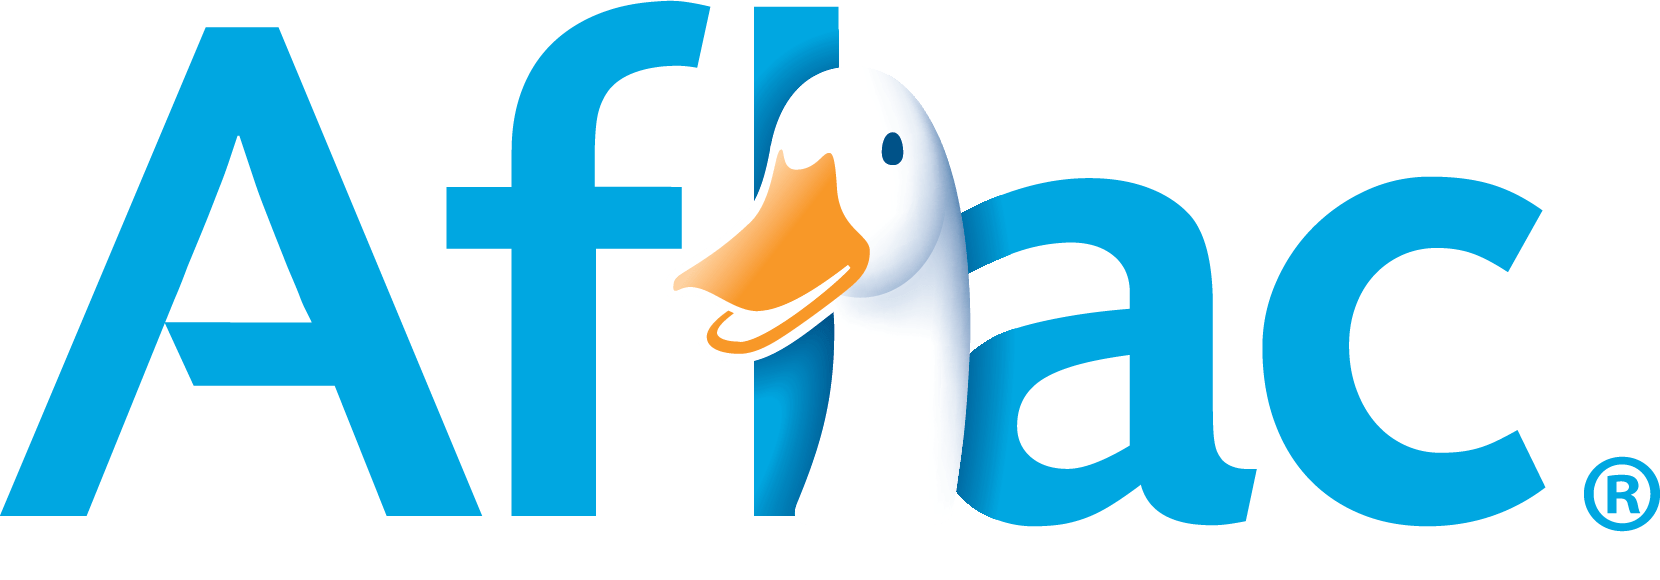 Aflac: Purpose ... With Feathers - Logo - https://s41078.pcdn.co/wp-content/uploads/2020/03/Rep_Aflac.png